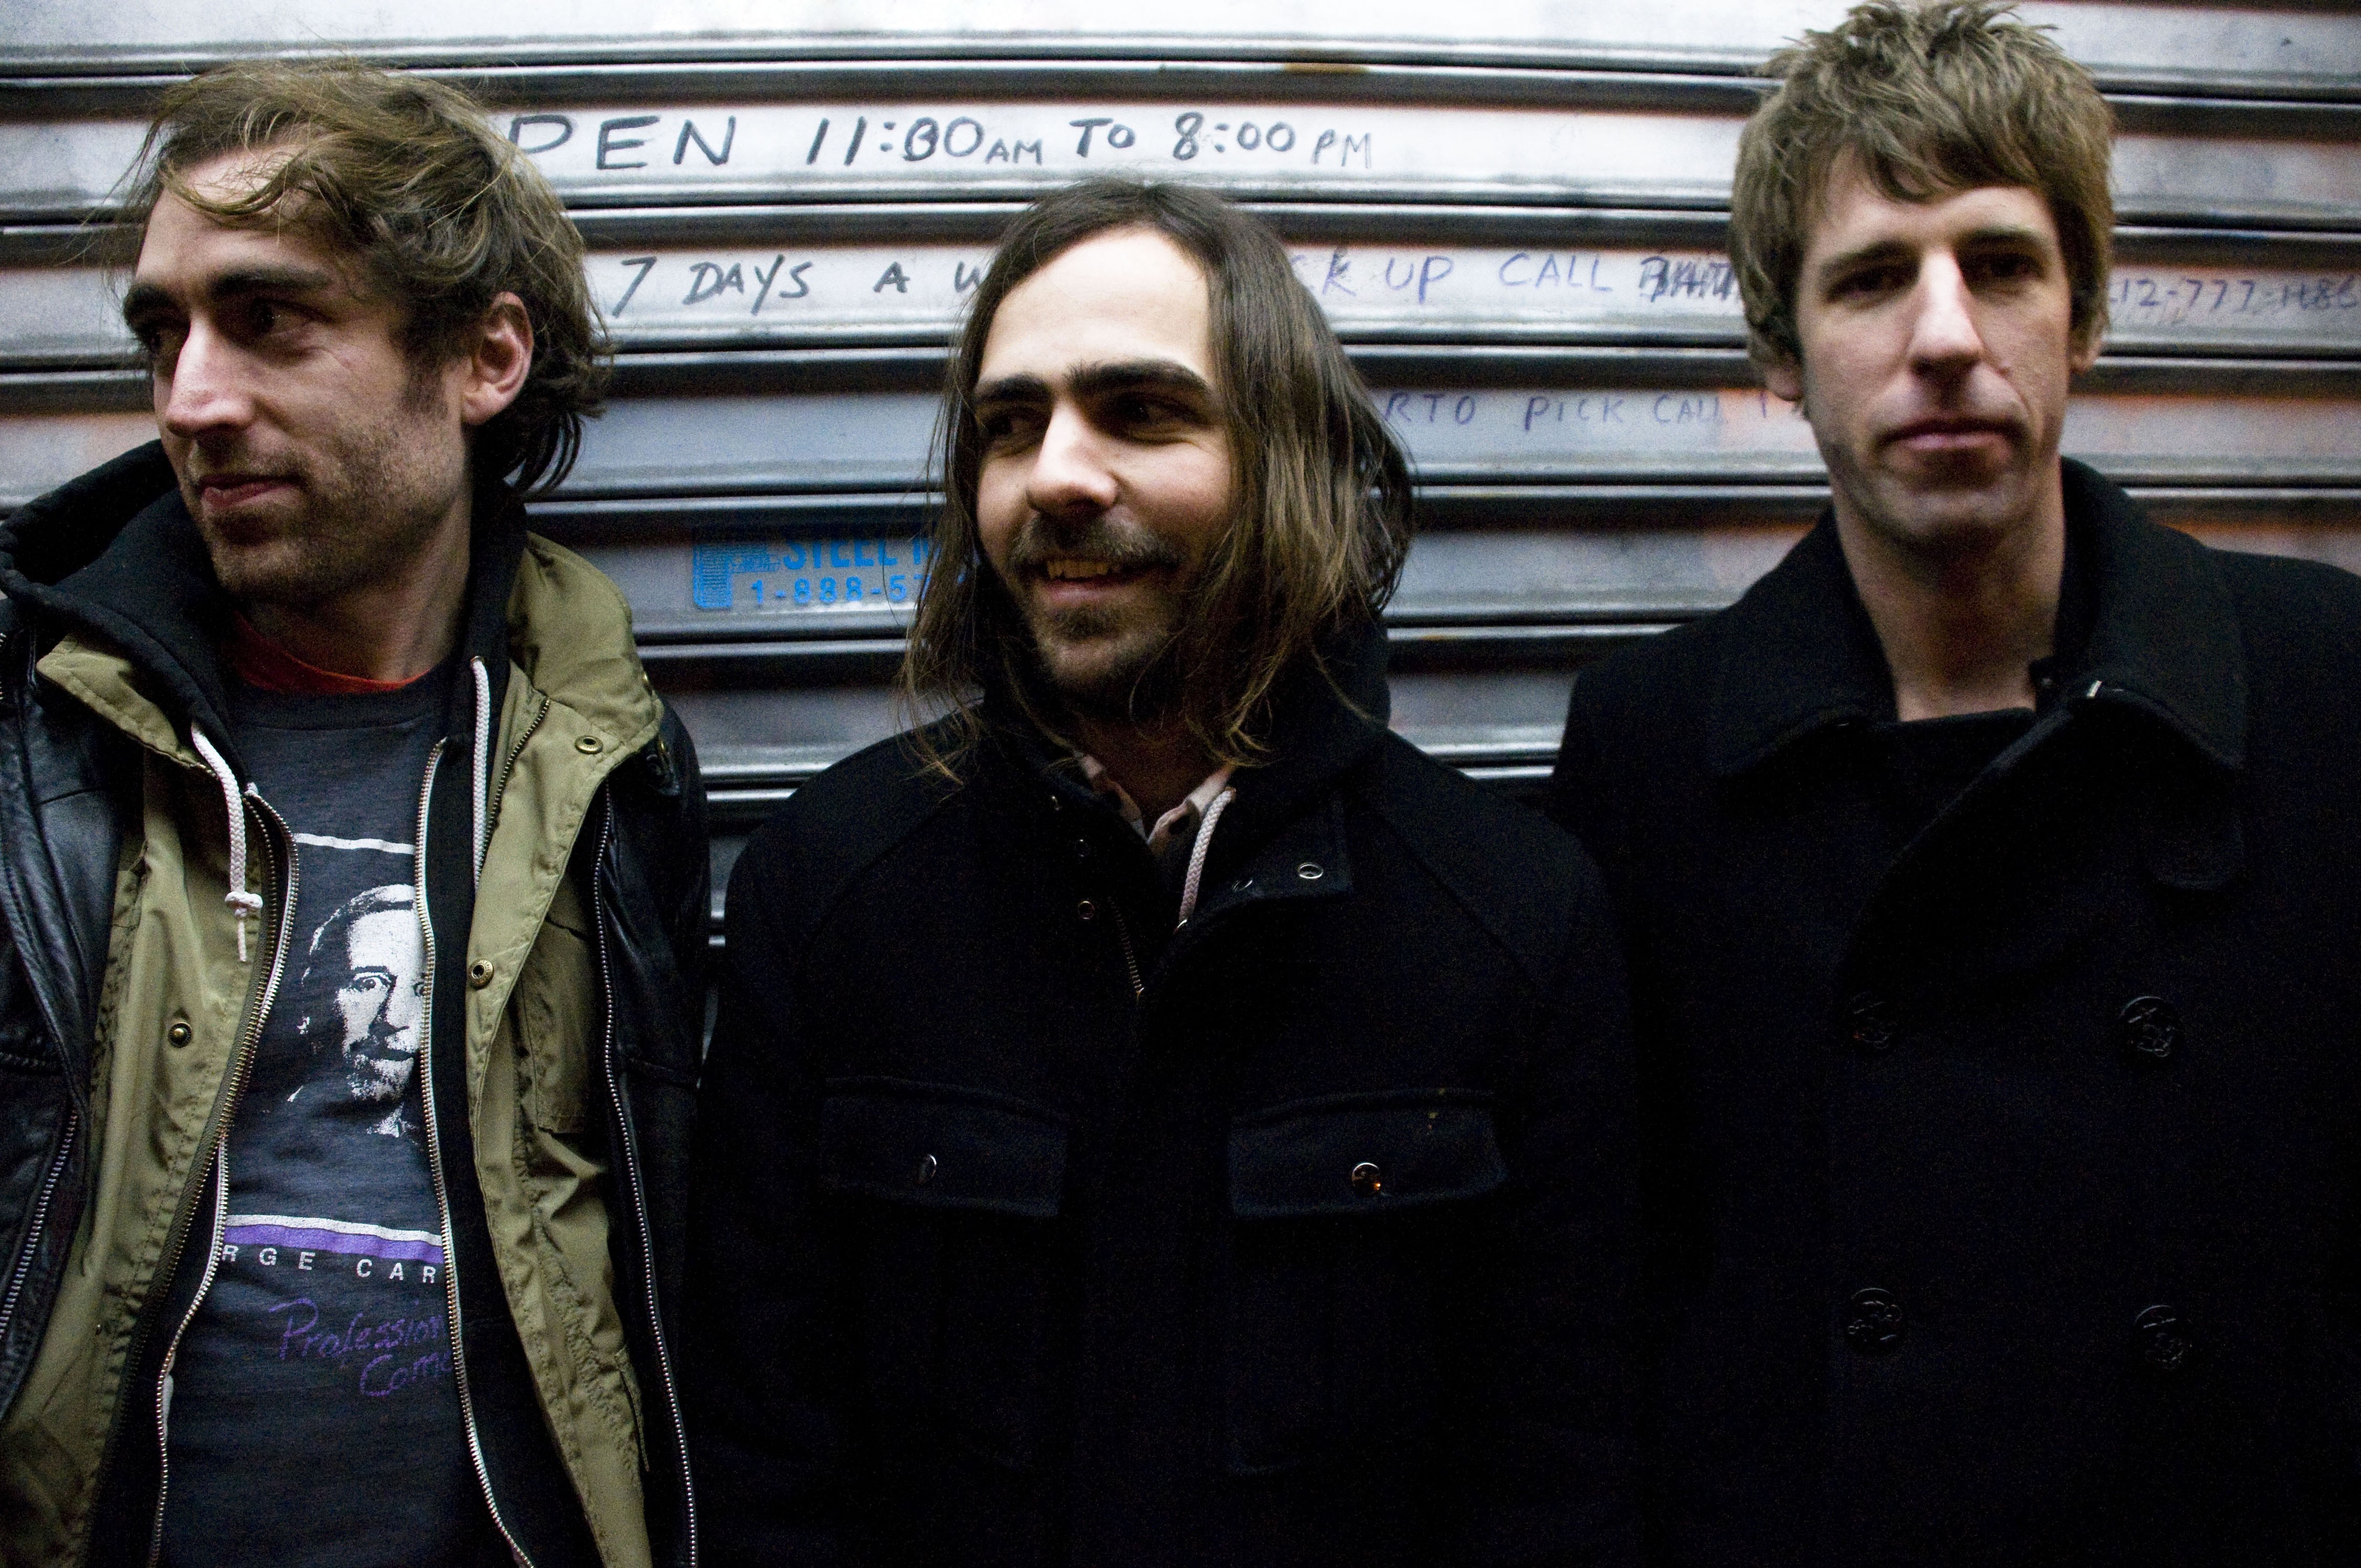 A Place to Bury Strangers are (from left) Lia Simone Braswell, Oliver Ackermann and Dion Lunadon.